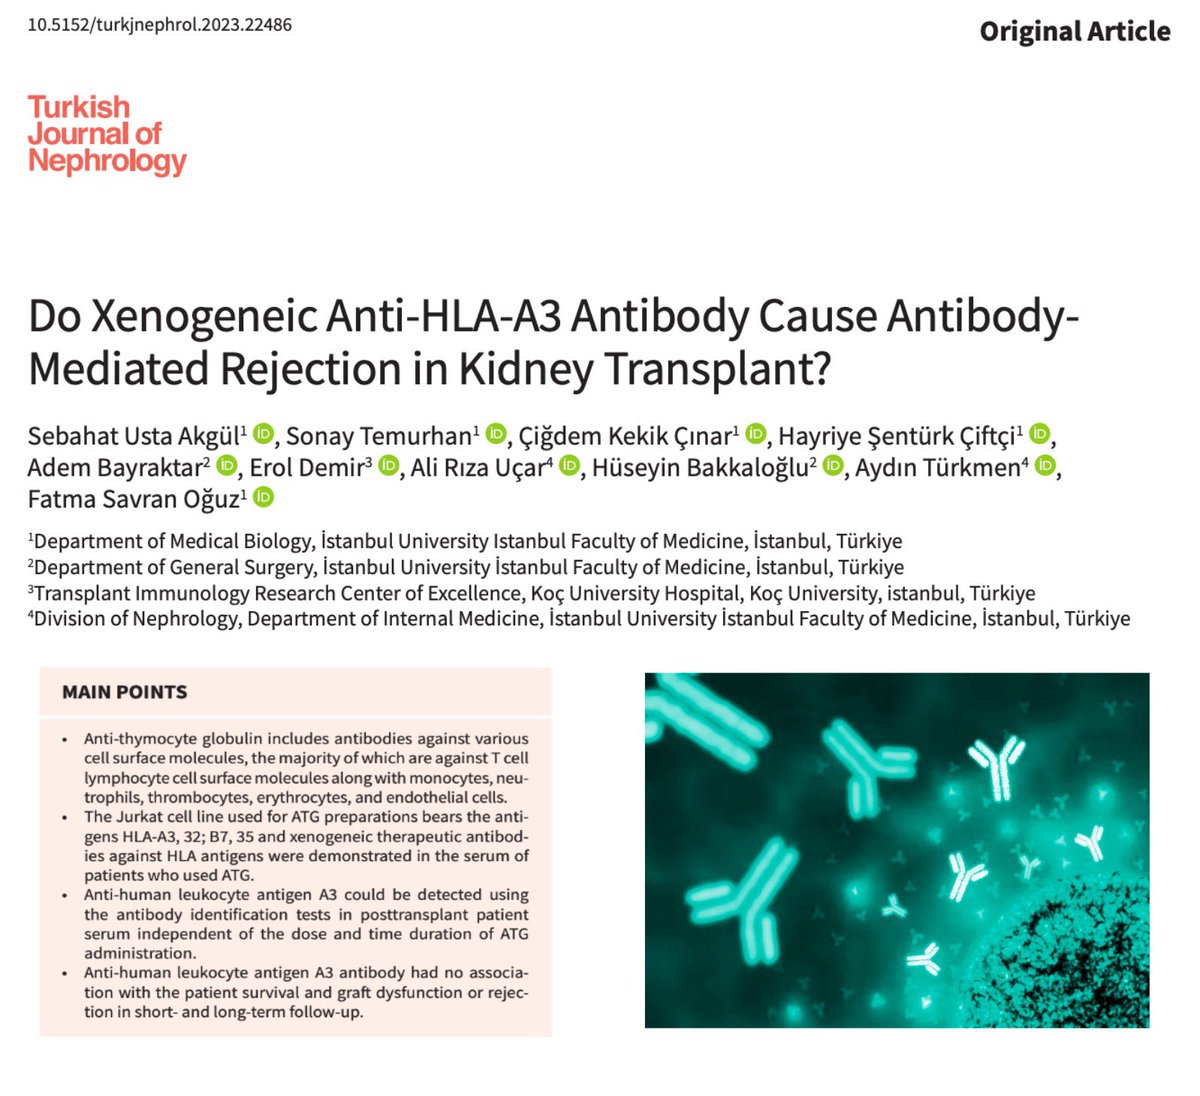 Usta Akgül S. et al. demonstrated that xenogeneic anti-human leukocyte antigen A3 antibody could be detected in posttransplant serum of patients receiving anti-thymocyte globulin induction independent of the dose and duration.